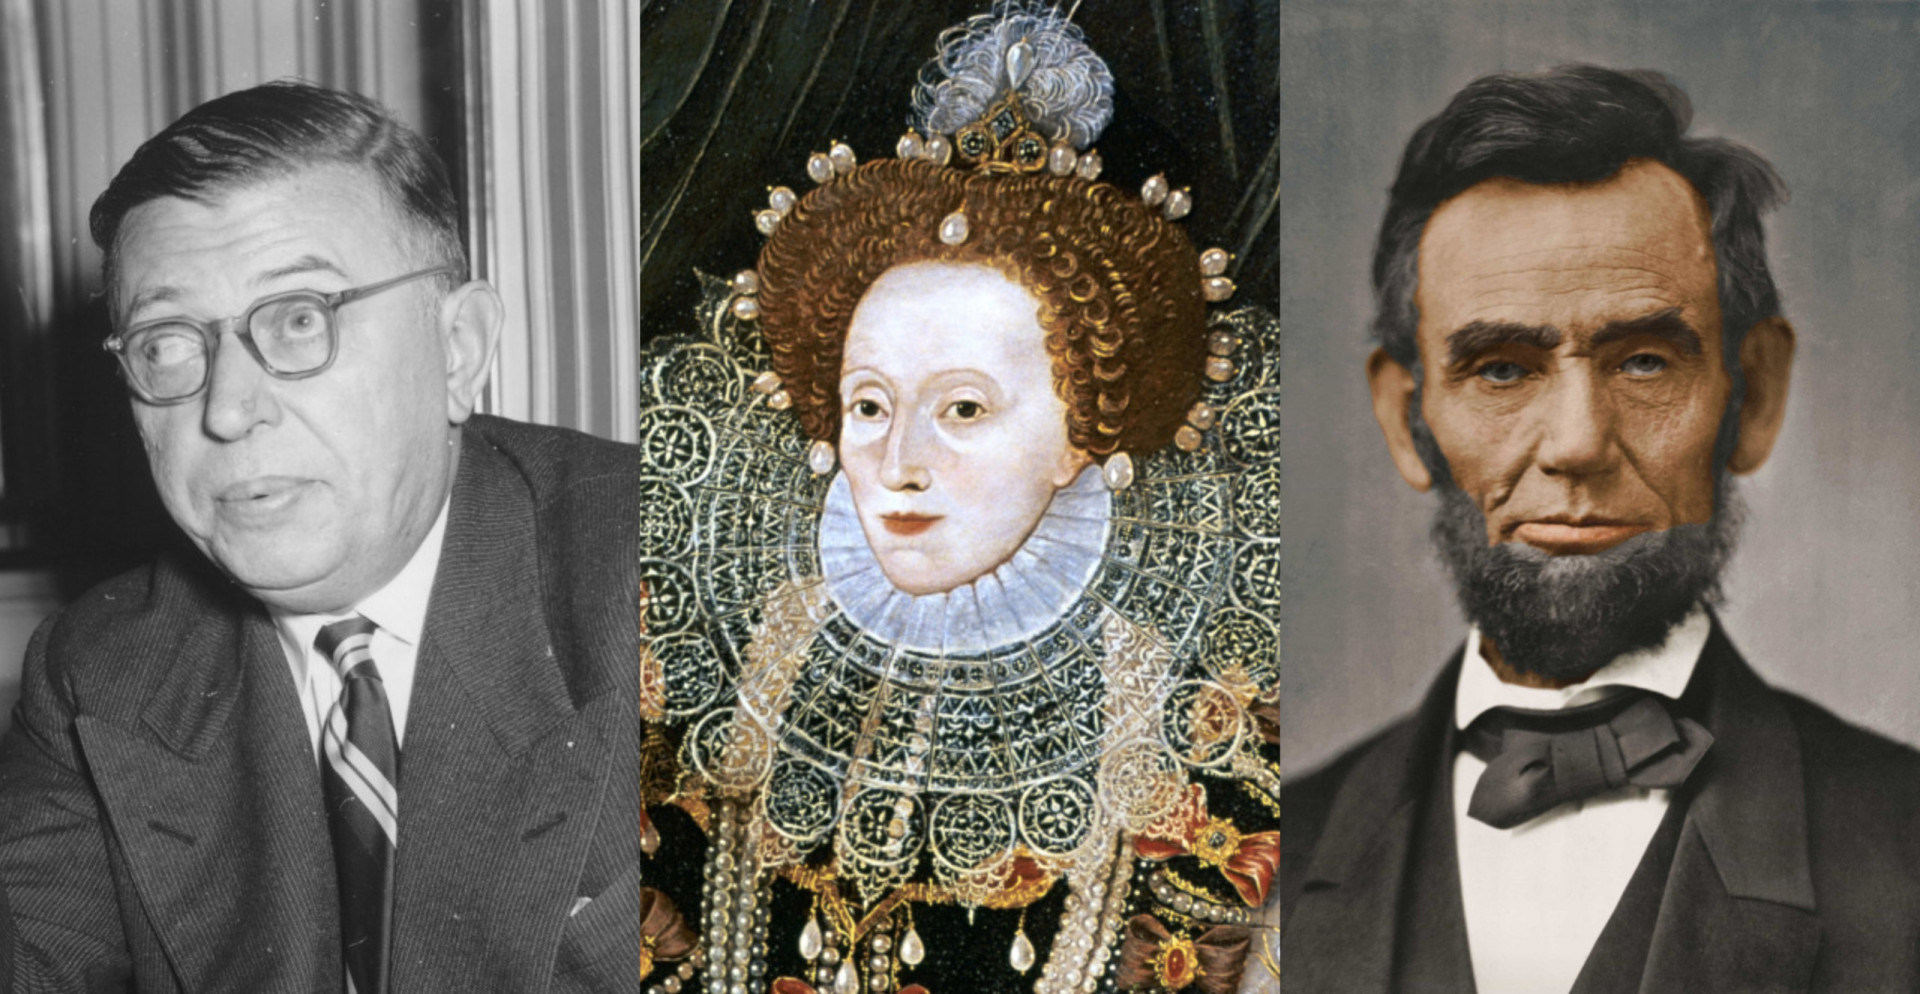 These famous figures were famously unattractive